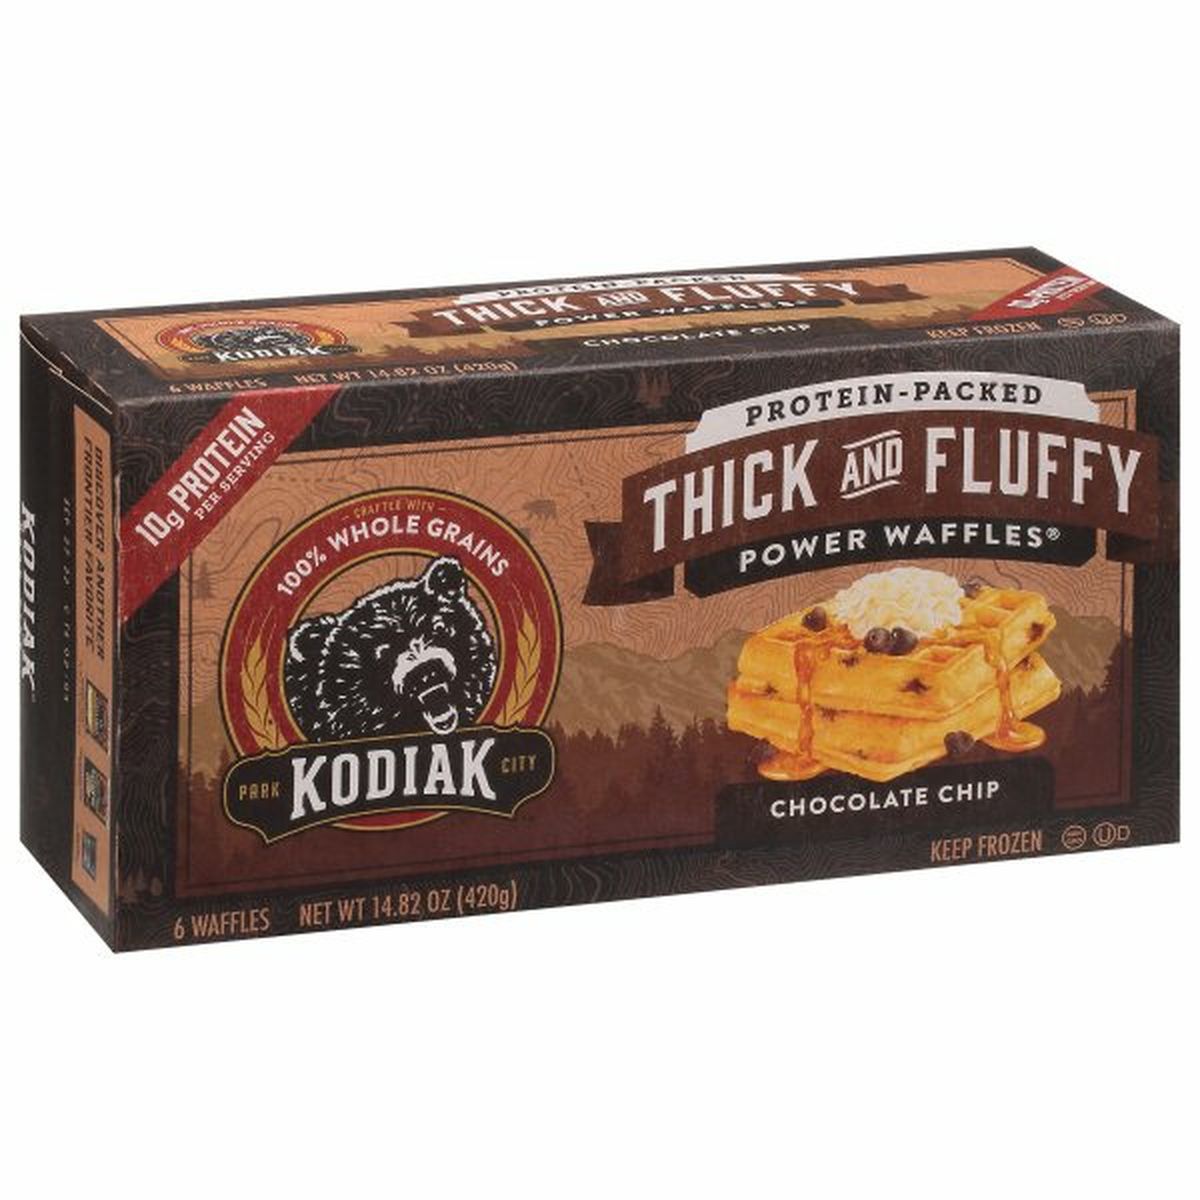 Calories in Kodiak Power Waffles, Chocolate Chip, Thick and Fluffy